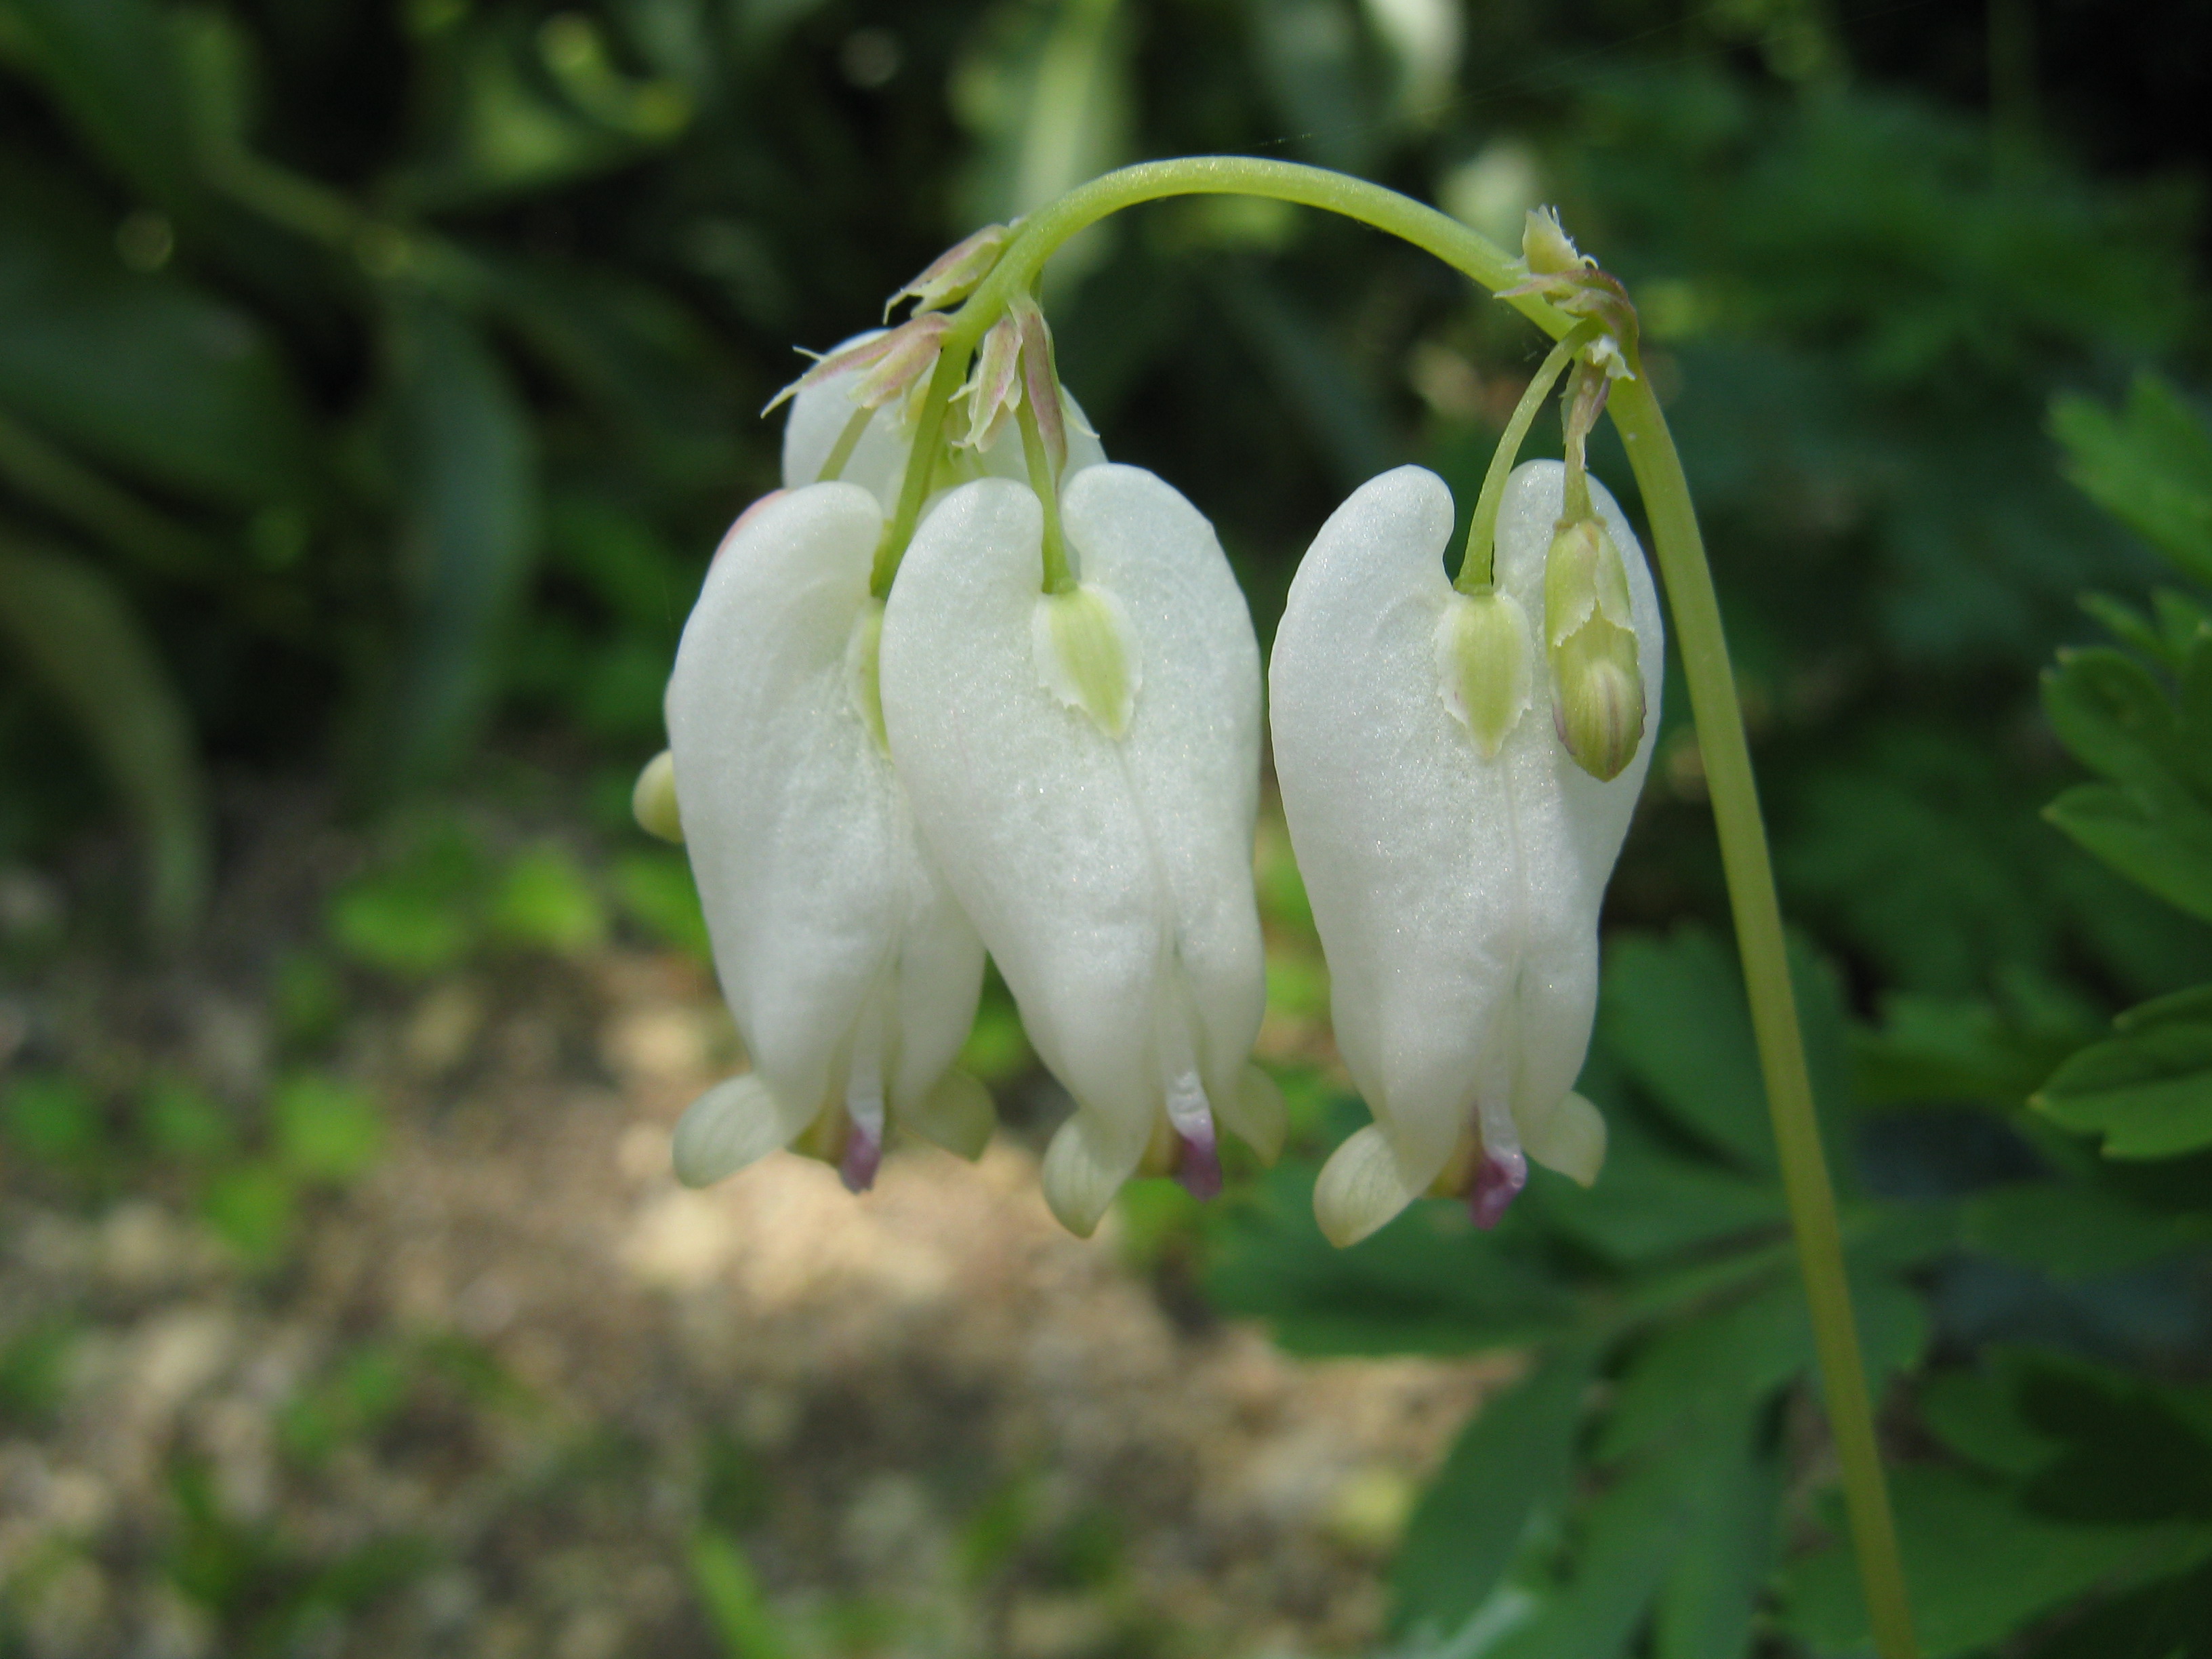 Dicentra formosa. Permission to use @ https://commons.wikimedia.org/wiki/File:Dicentra_formosa_'Aurora'2.jpg